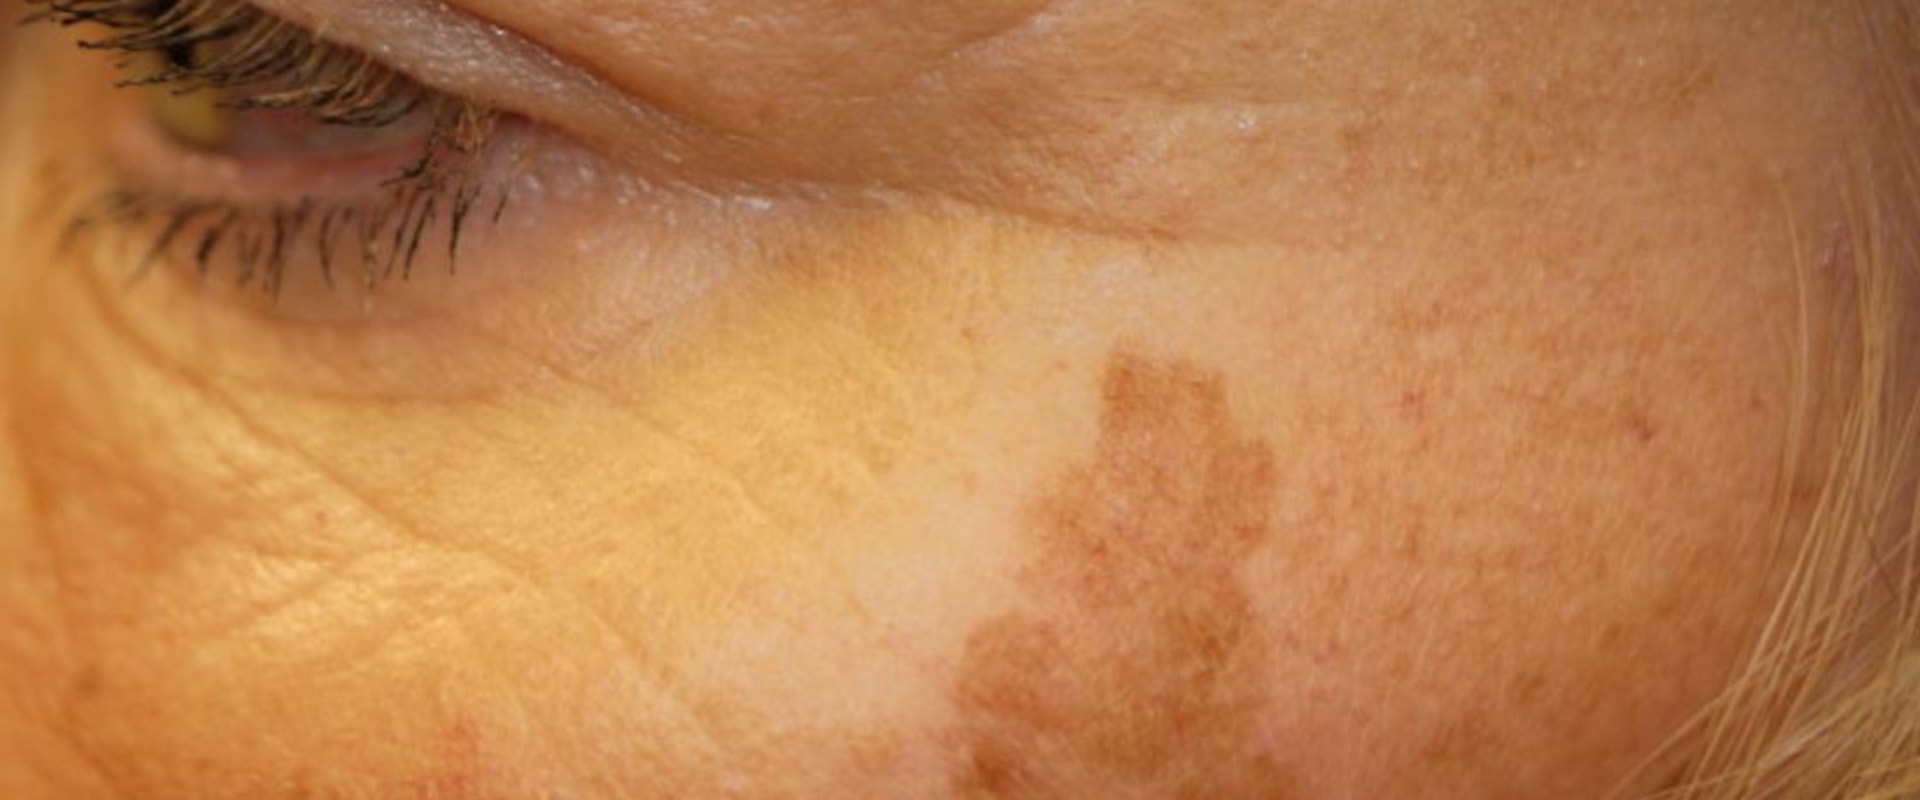 Pigmentation Changes in the Skin: Causes and Treatments